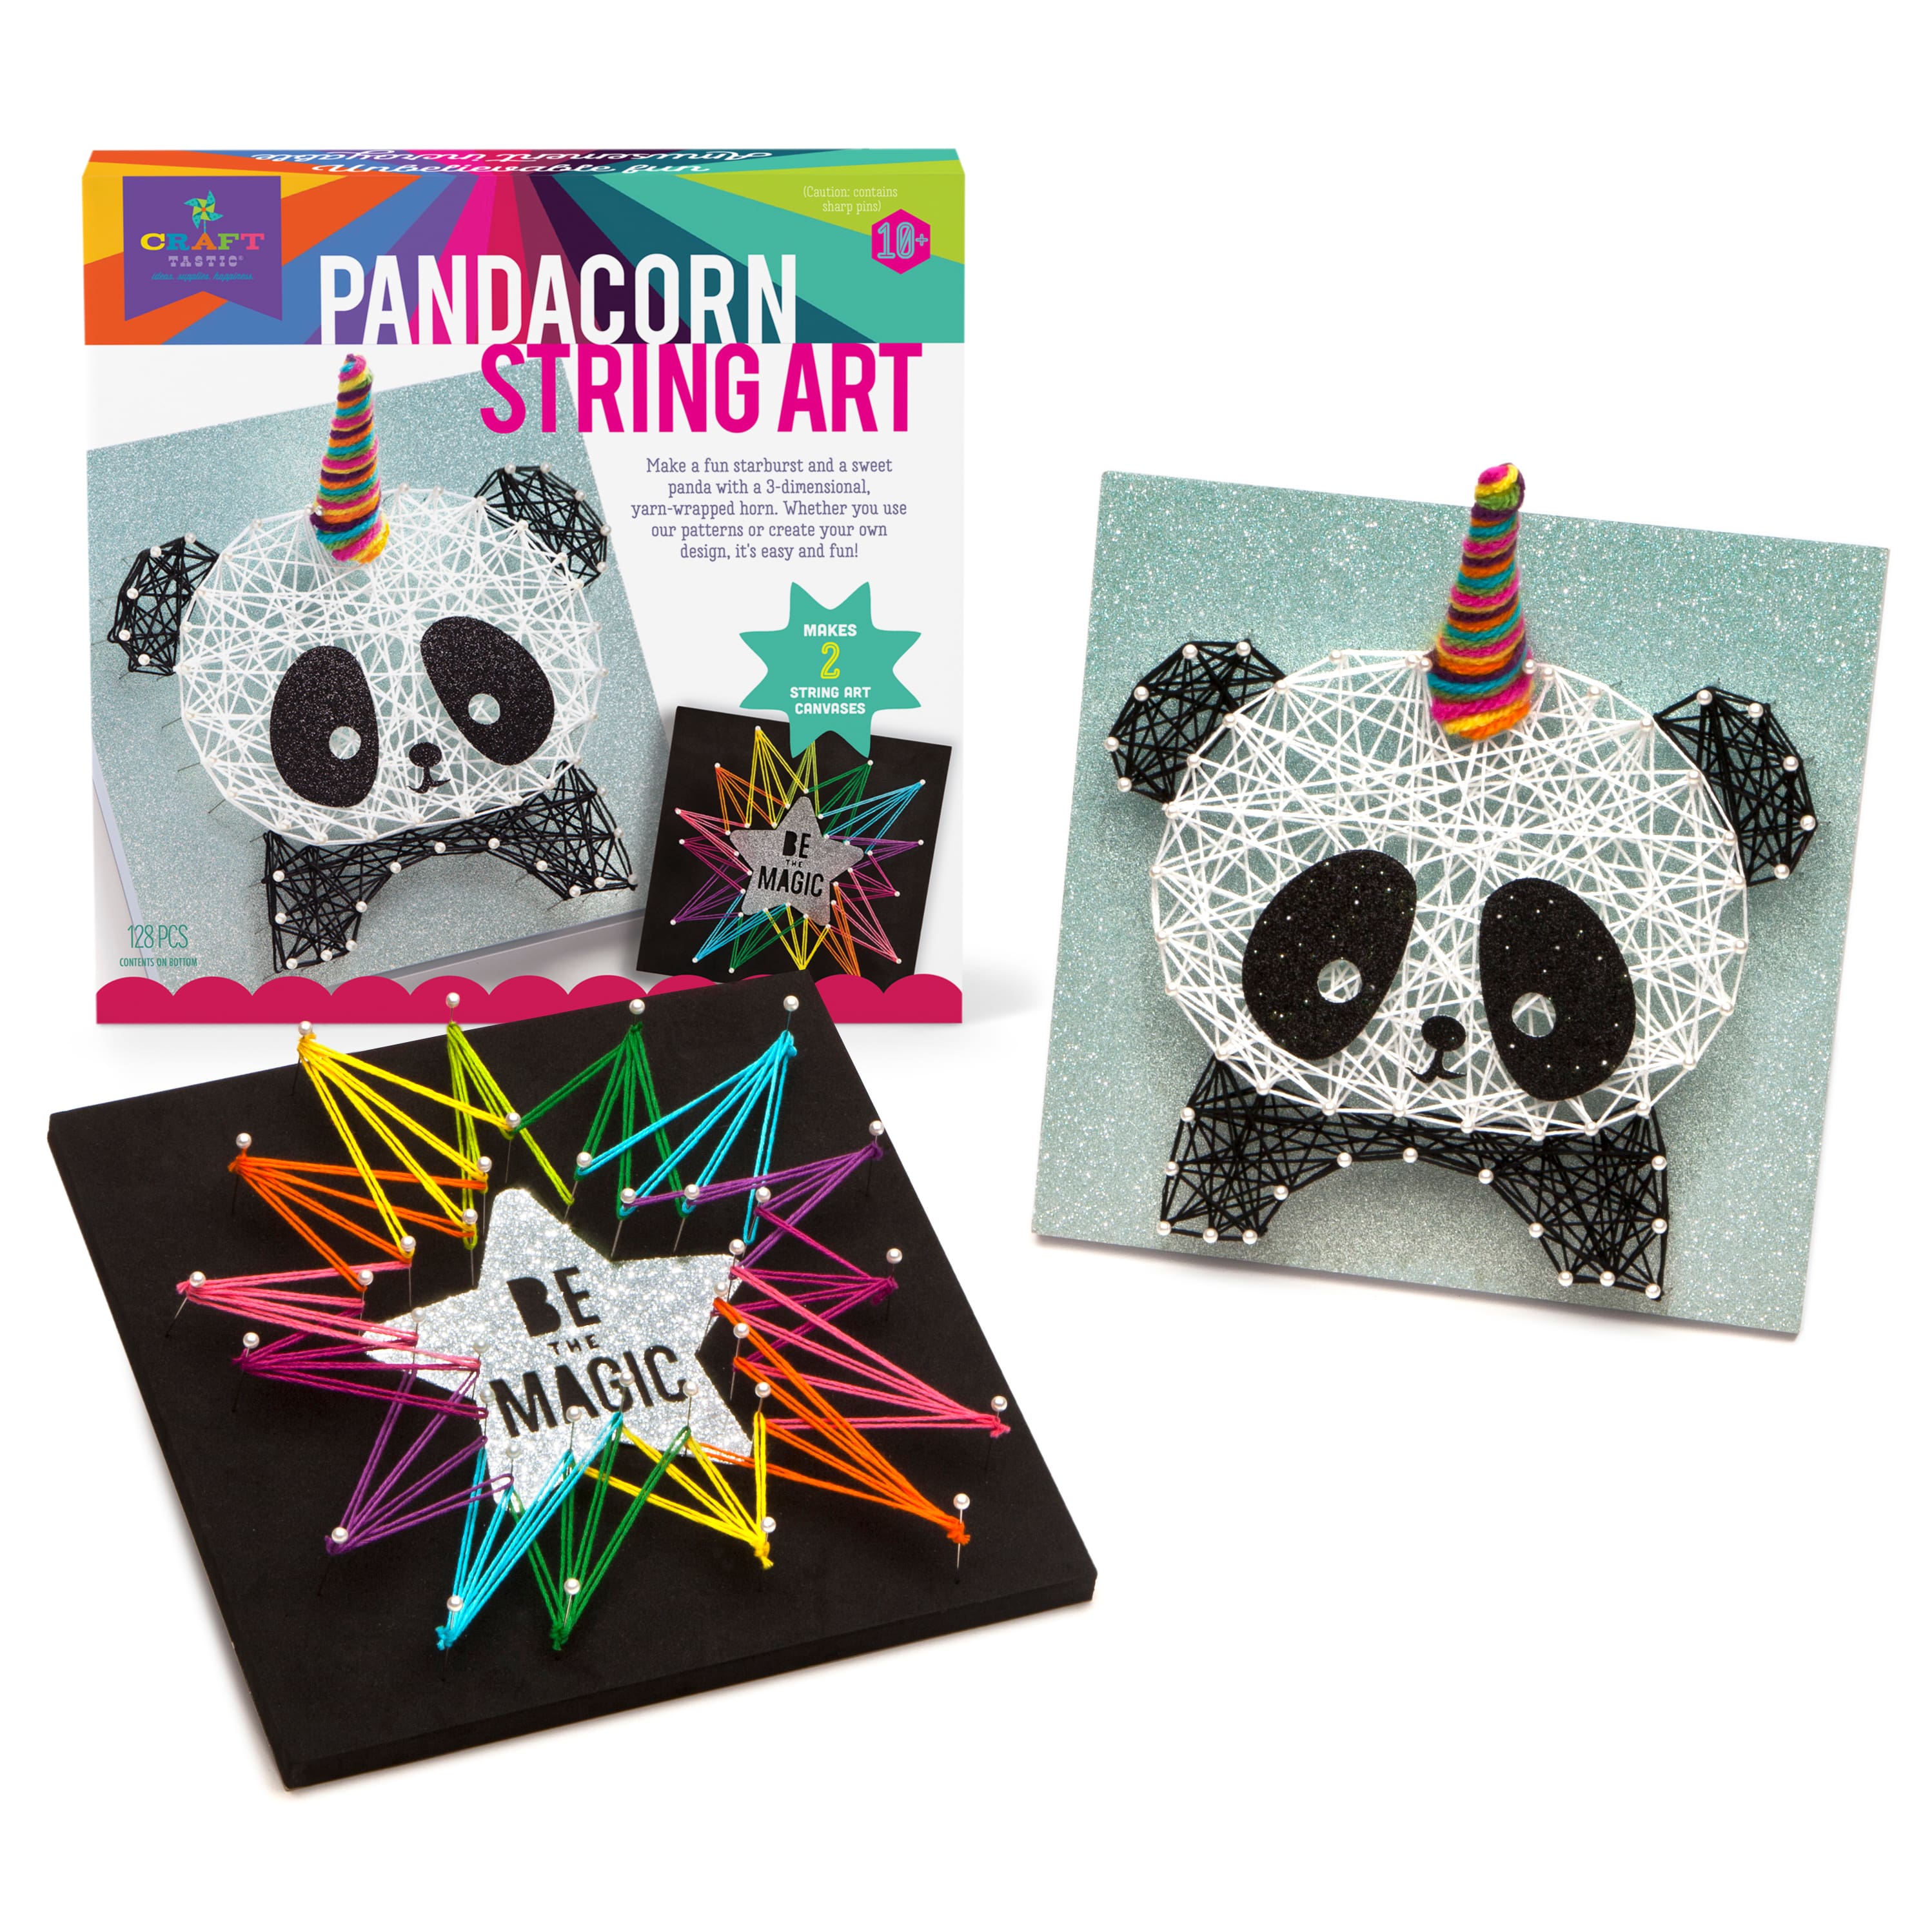 Find The Craft Tastic String Art Pandacorn At Michaels